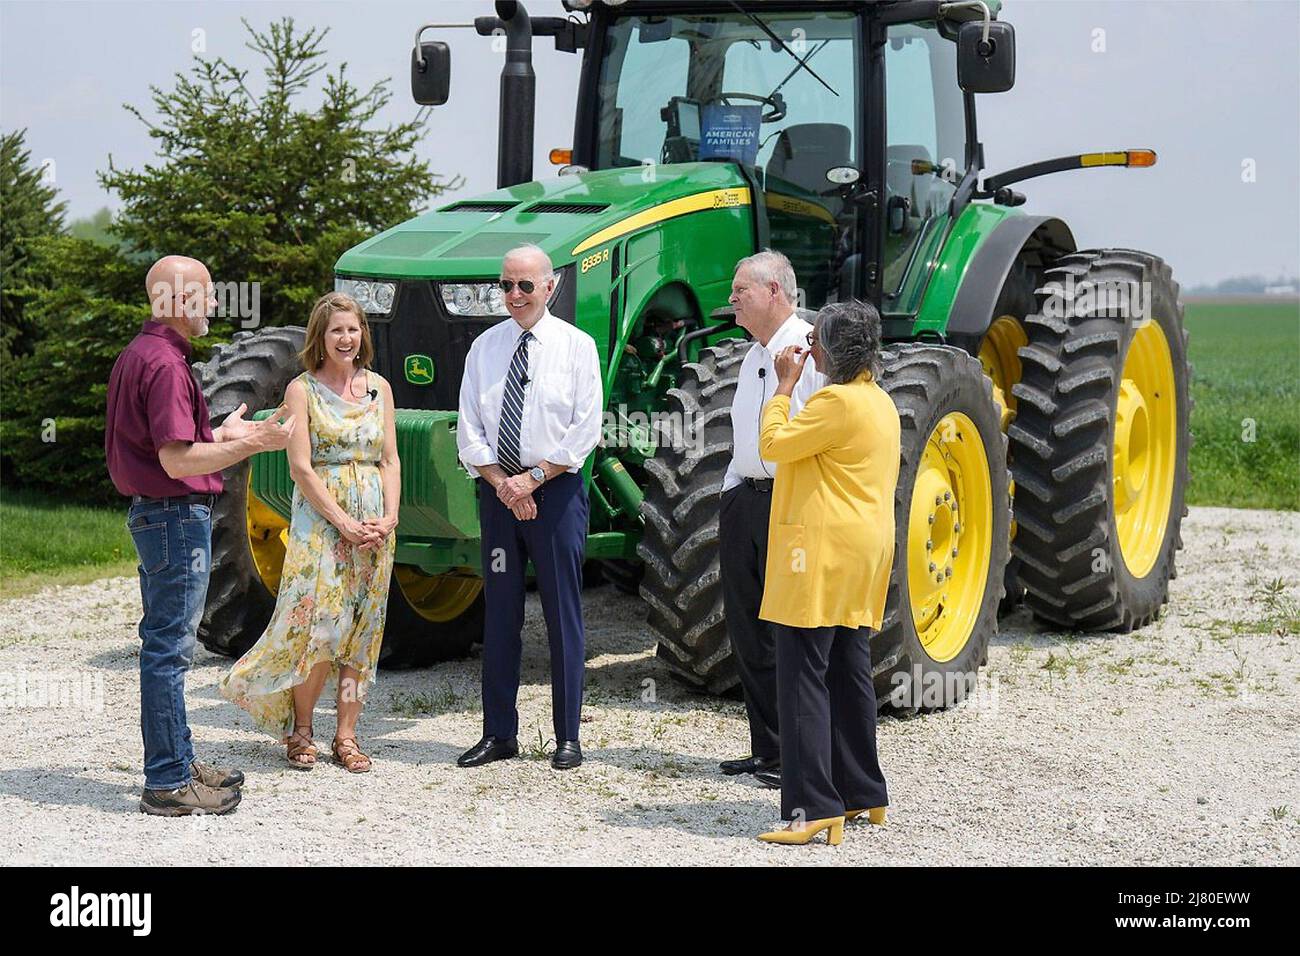 Kankakee, United States Of America. 11th May, 2022. Kankakee, United States of America. 11 May, 2022. U.S President Joe Biden, listens to farmer Jeff O'Connor, left, owner of O'Connor Farms, during a visit to his farmstead, May 11, 2022 in Kankakee, Illinois. Standing with Biden from left to right are: Farm owners Jeff O'Connor, Gina O'Connor, President Joe Biden, Agriculture Secretary Tom Vilsack and Rep. Robin Kelly of Illinois. Credit: Adam Schultz/White House Photo/Alamy Live News Stock Photo